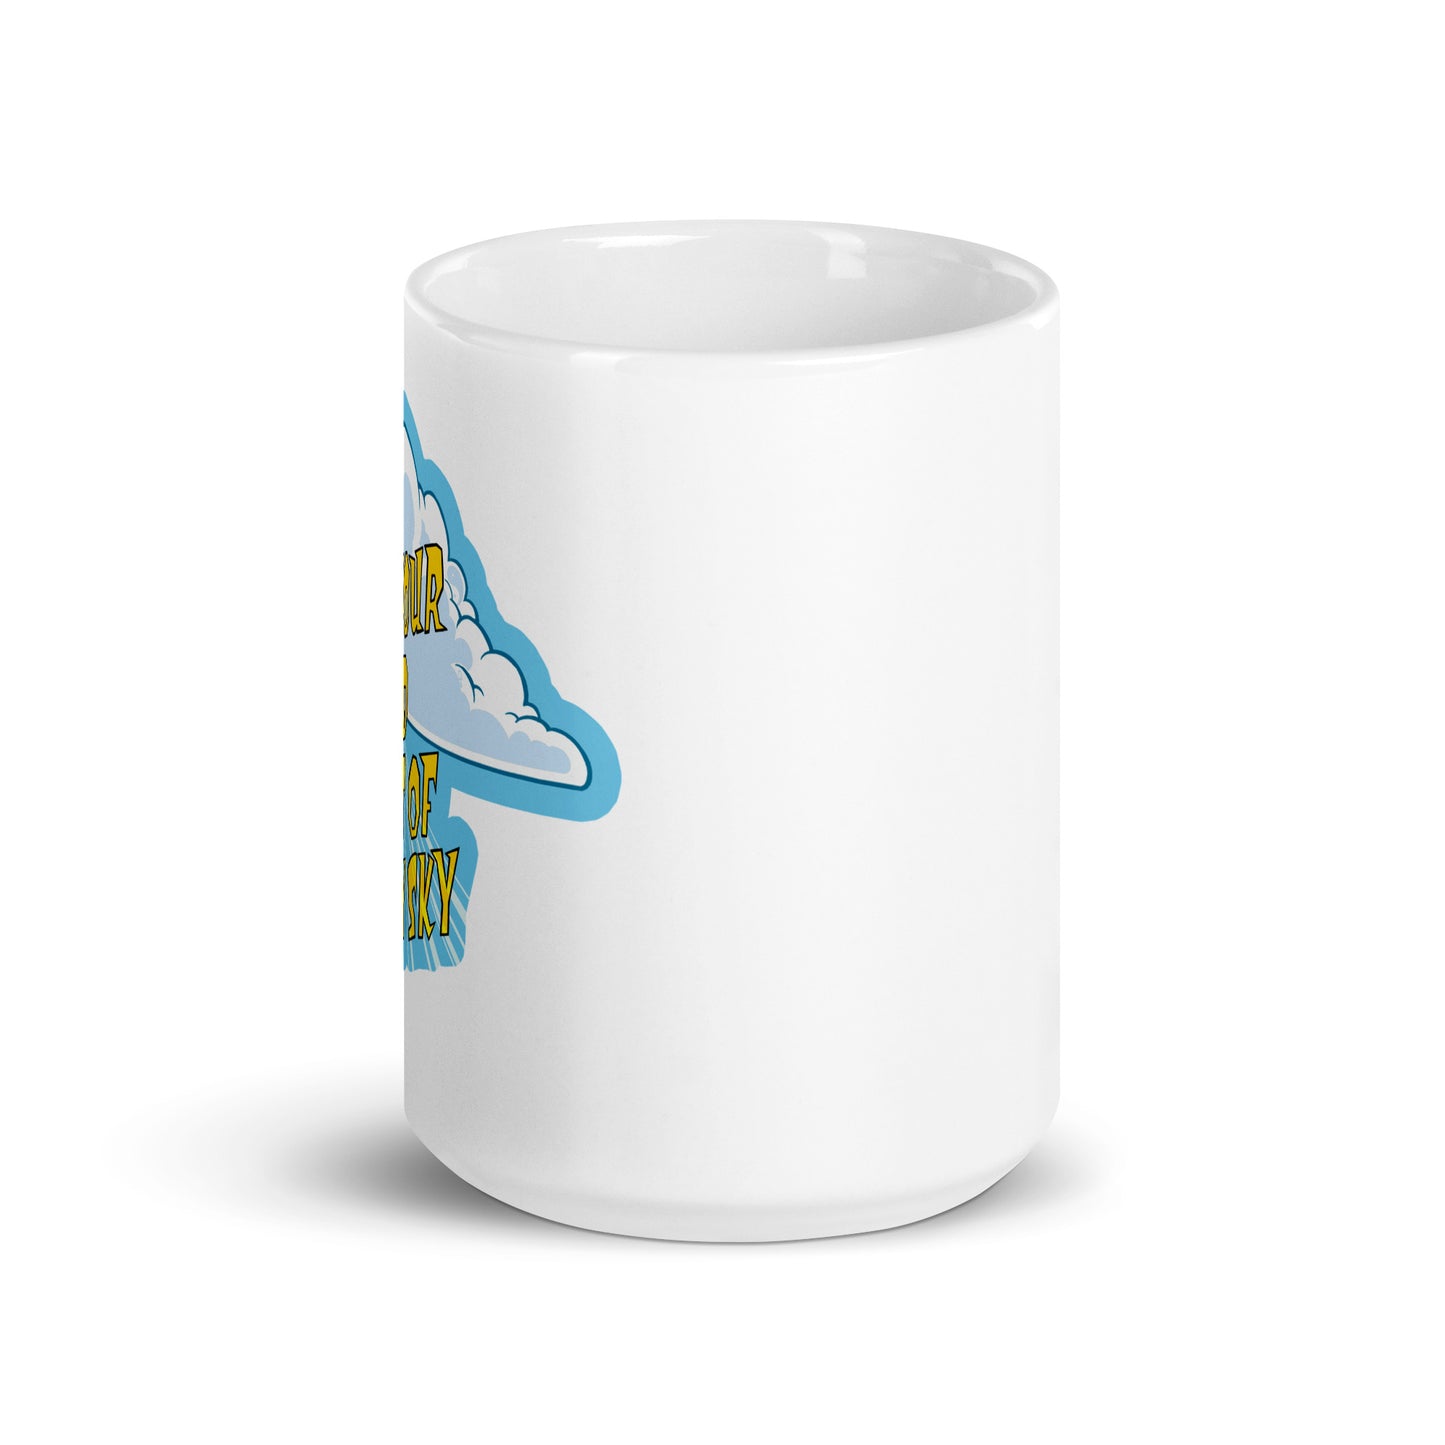 Get Your God Out Of My Sky Coffee Mug